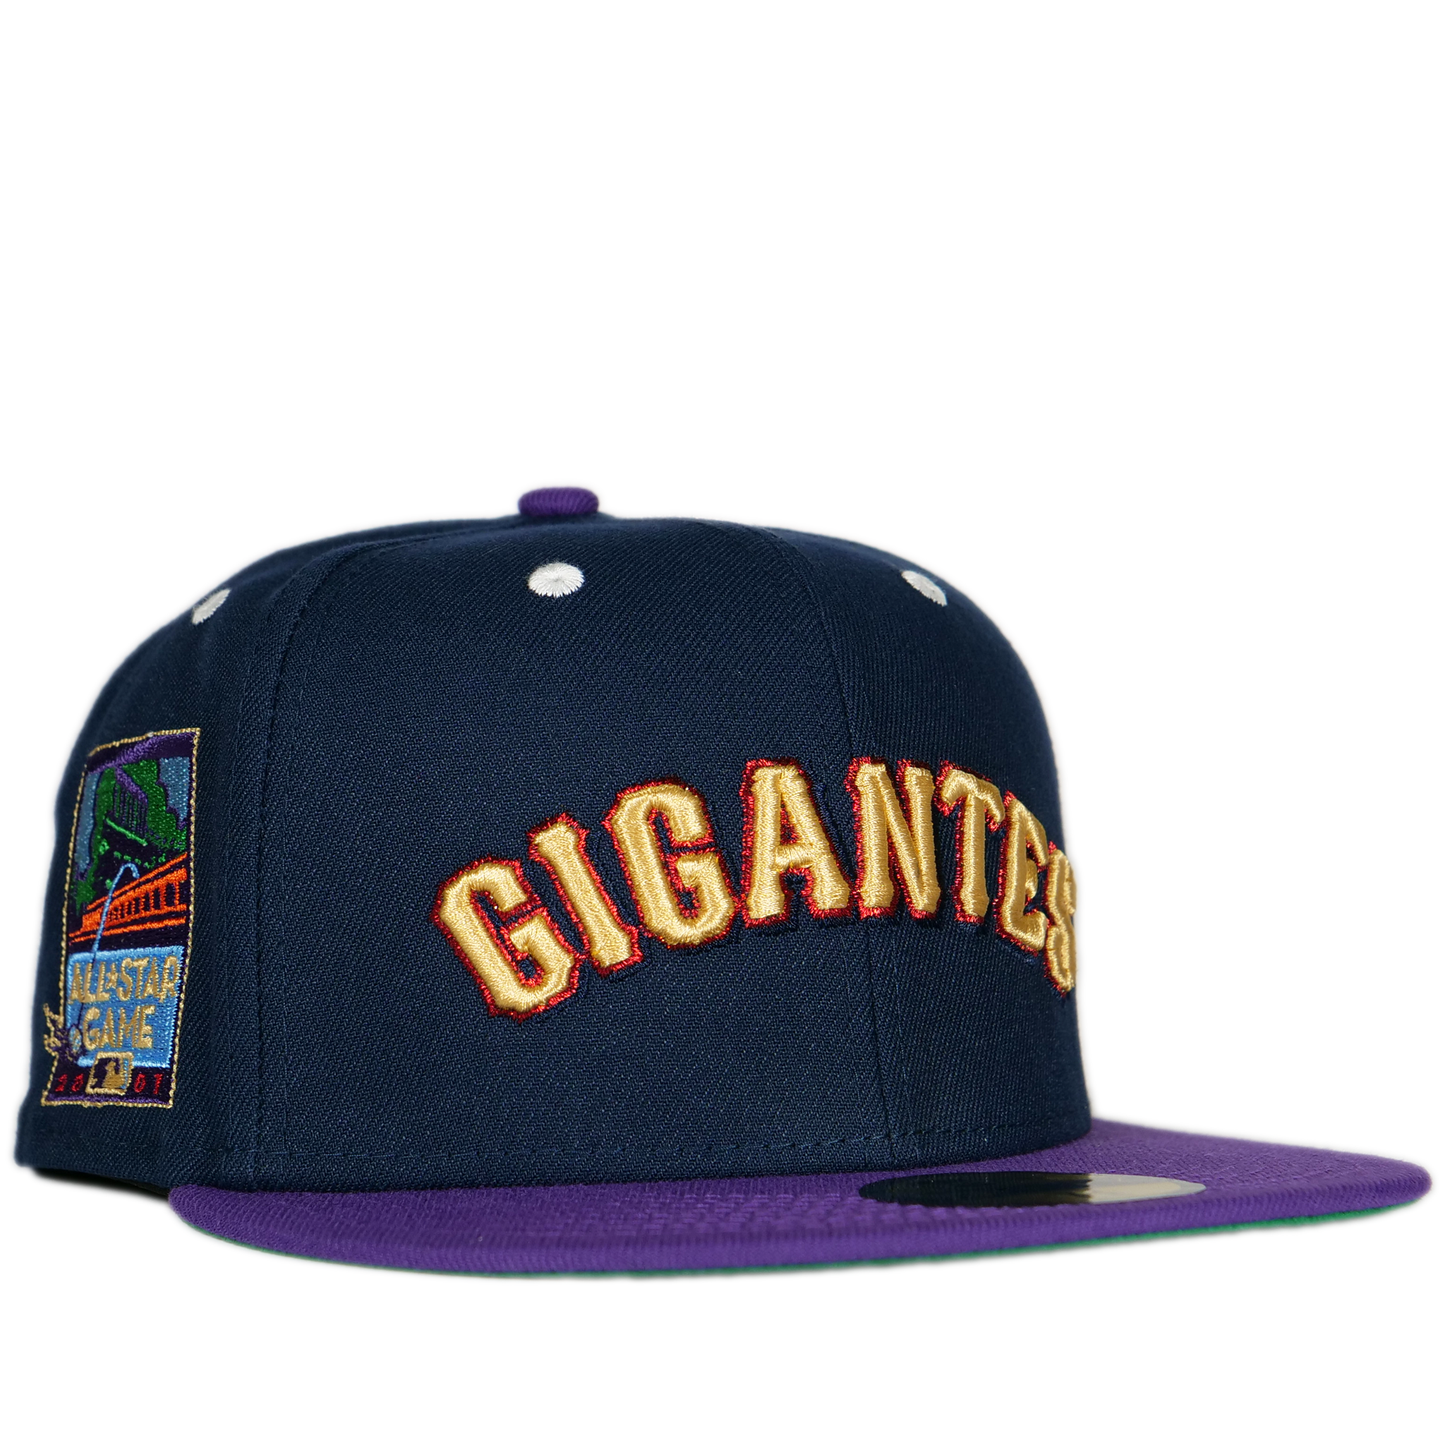 New Era San Francisco Giants 59Fifty Fitted Hat - Navy Blue/ Purple/ Green